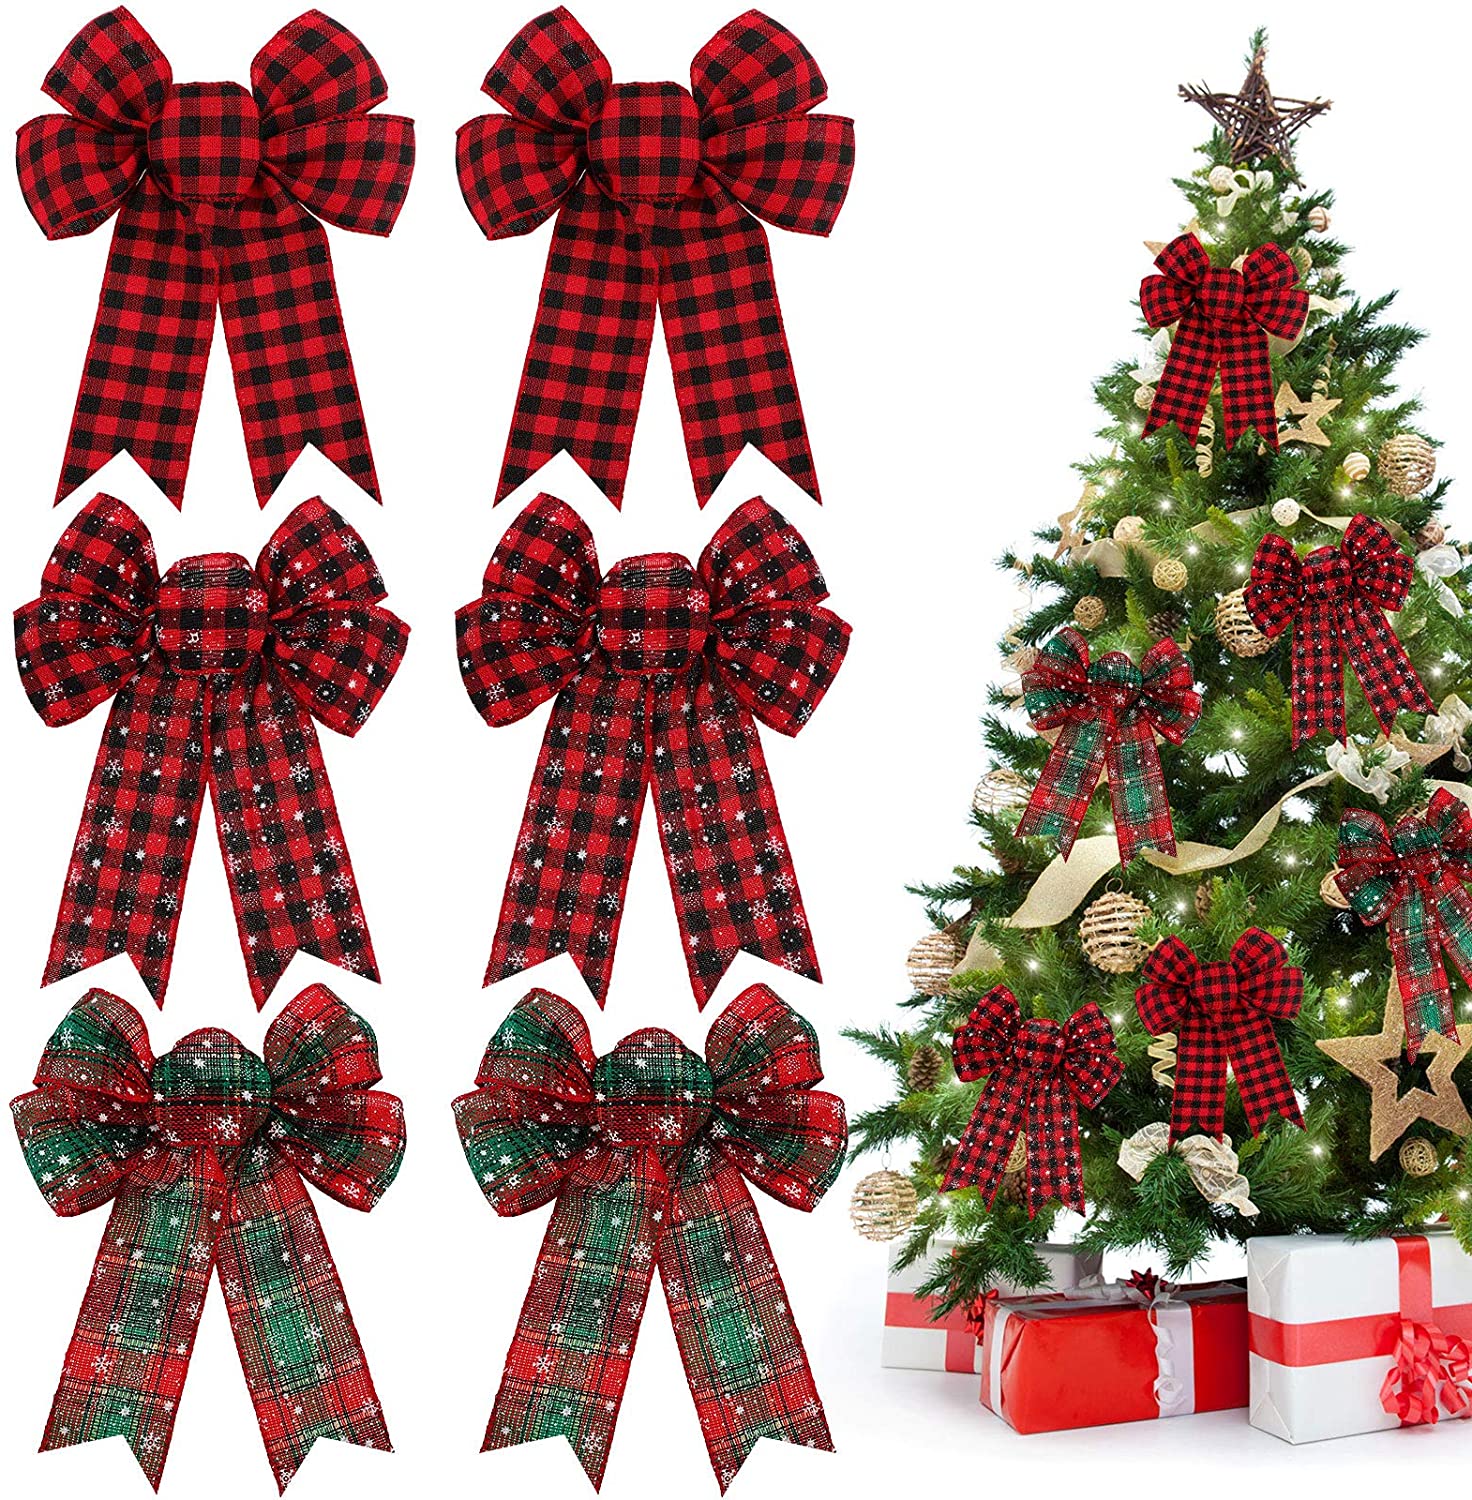 WILLBOND 12 Pieces Red Christmas Bows Ornament PVC Xmas Tree Wreaths Bows Snowflake Bows Decorations Christmas Holiday Party Patterns for Indoor Outdoor Decorations